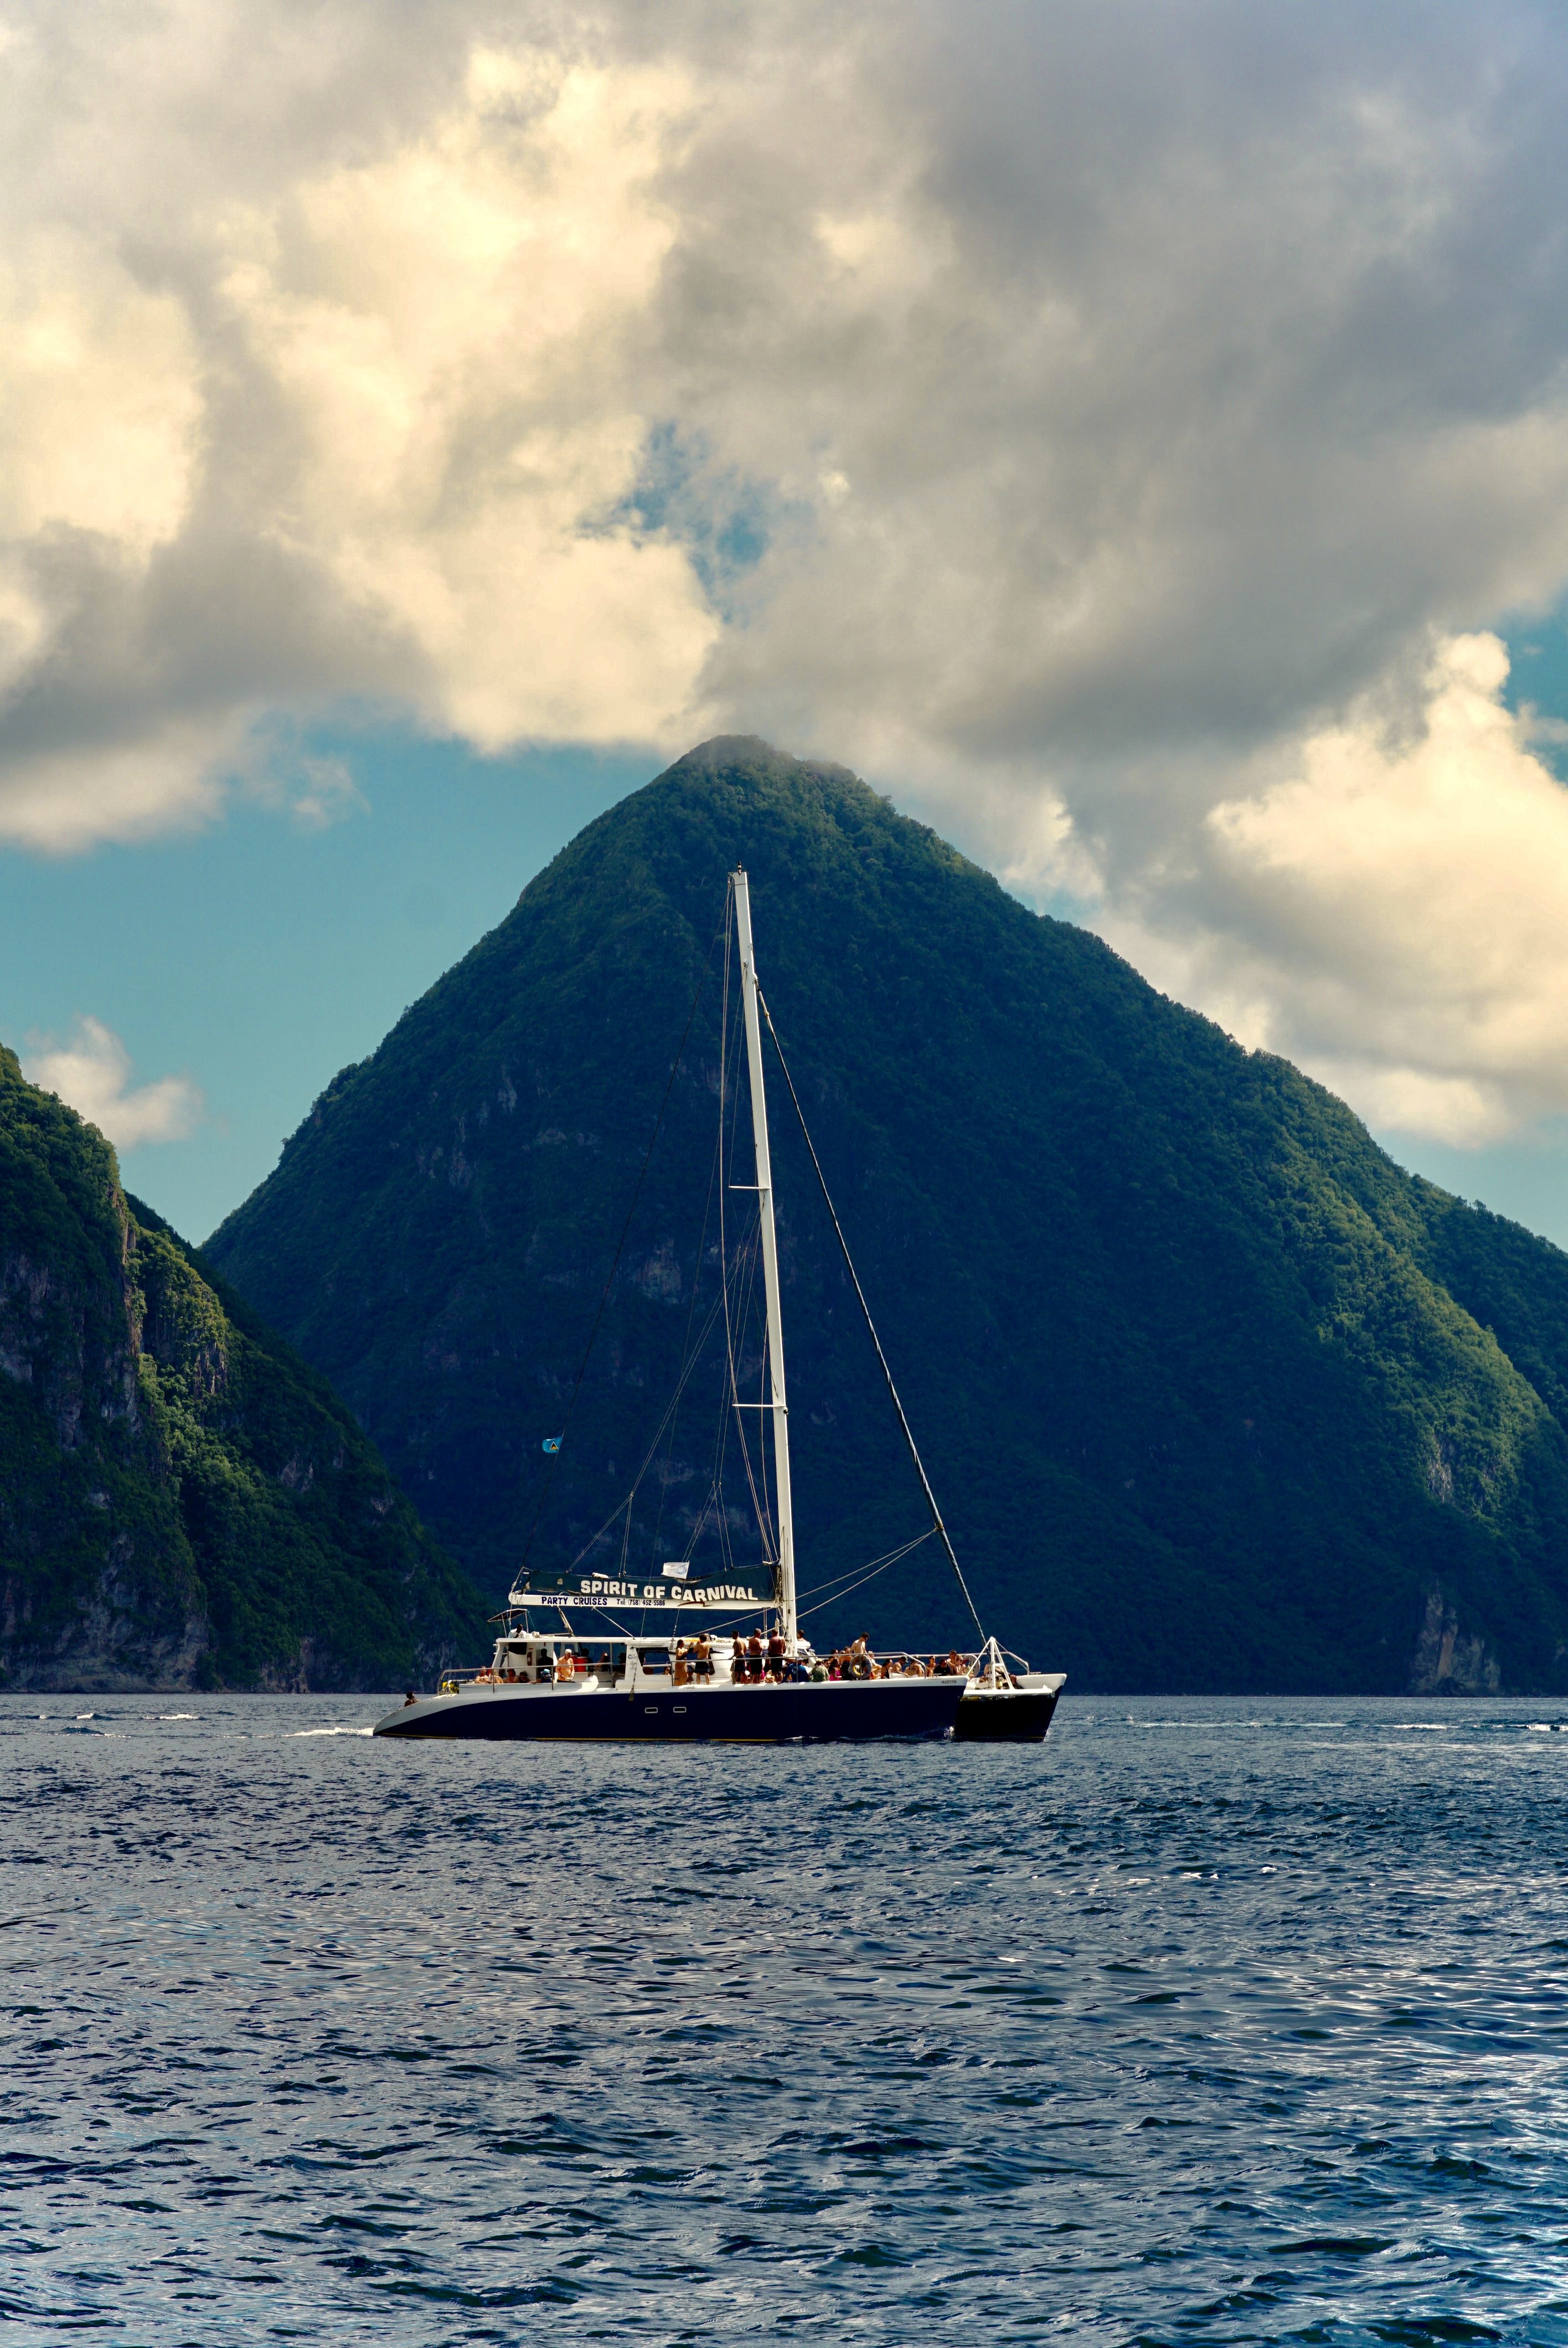 a catamarran full of people in from of Gros Piton, showing one of the best St. Lucia excursions